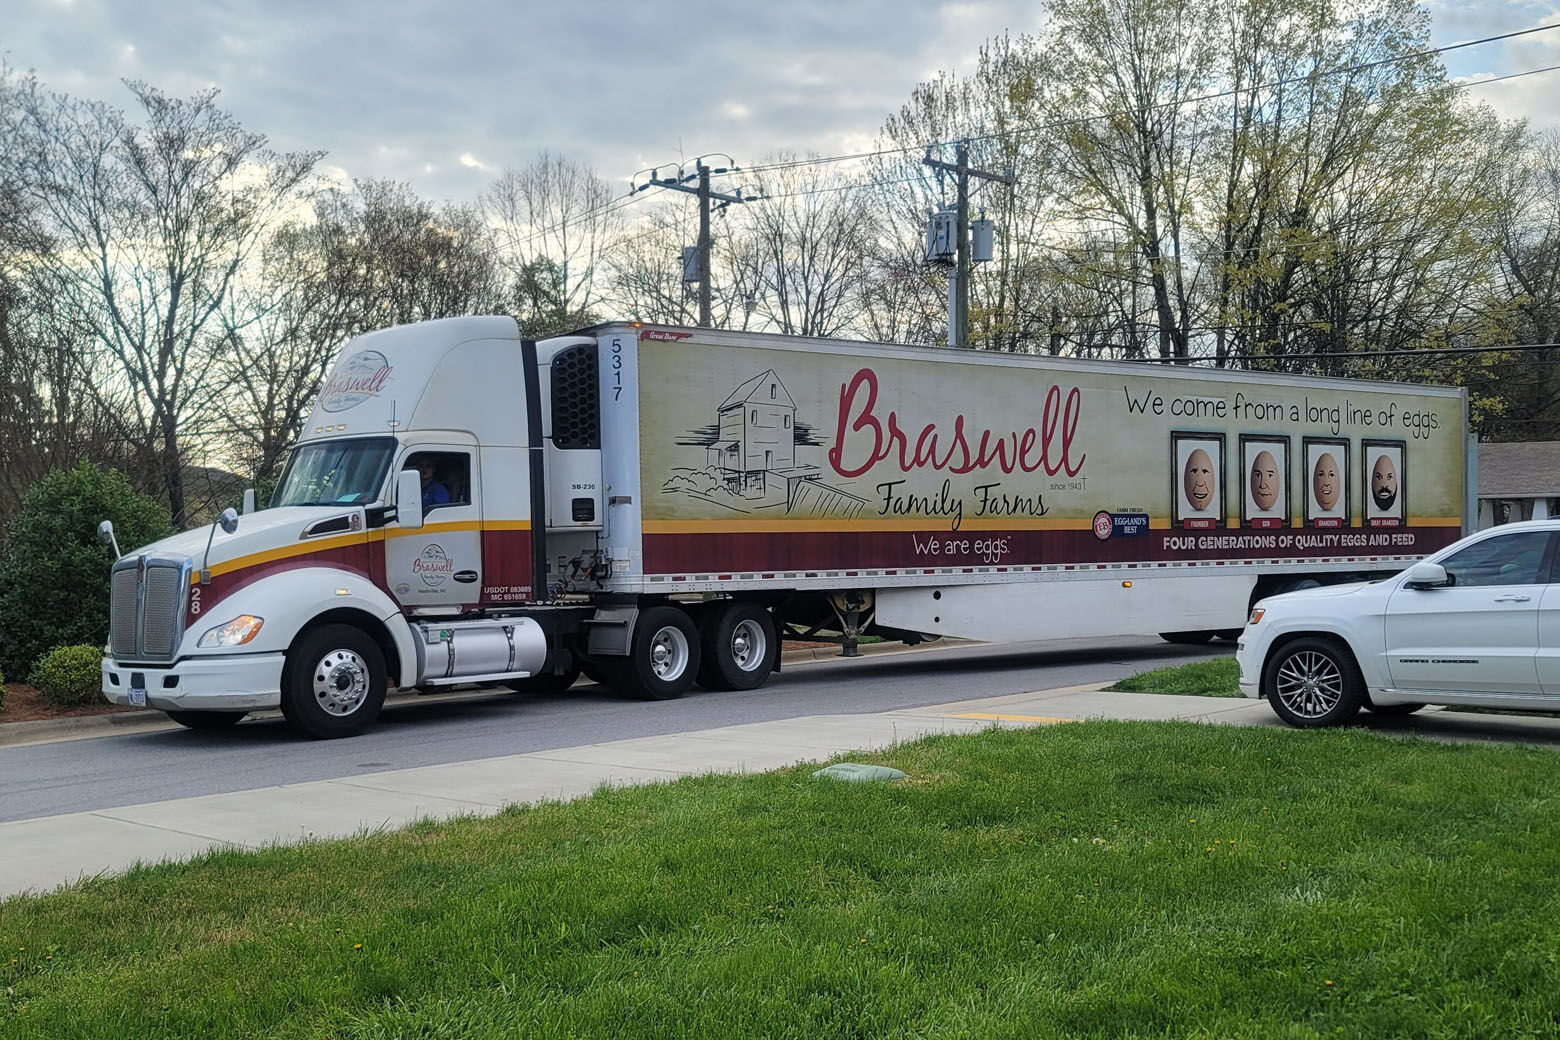 The White House Easter eggs being transported in the Braswell Family Farm truck (Courtesy Andrew McMillan/Braswell Family Farms)